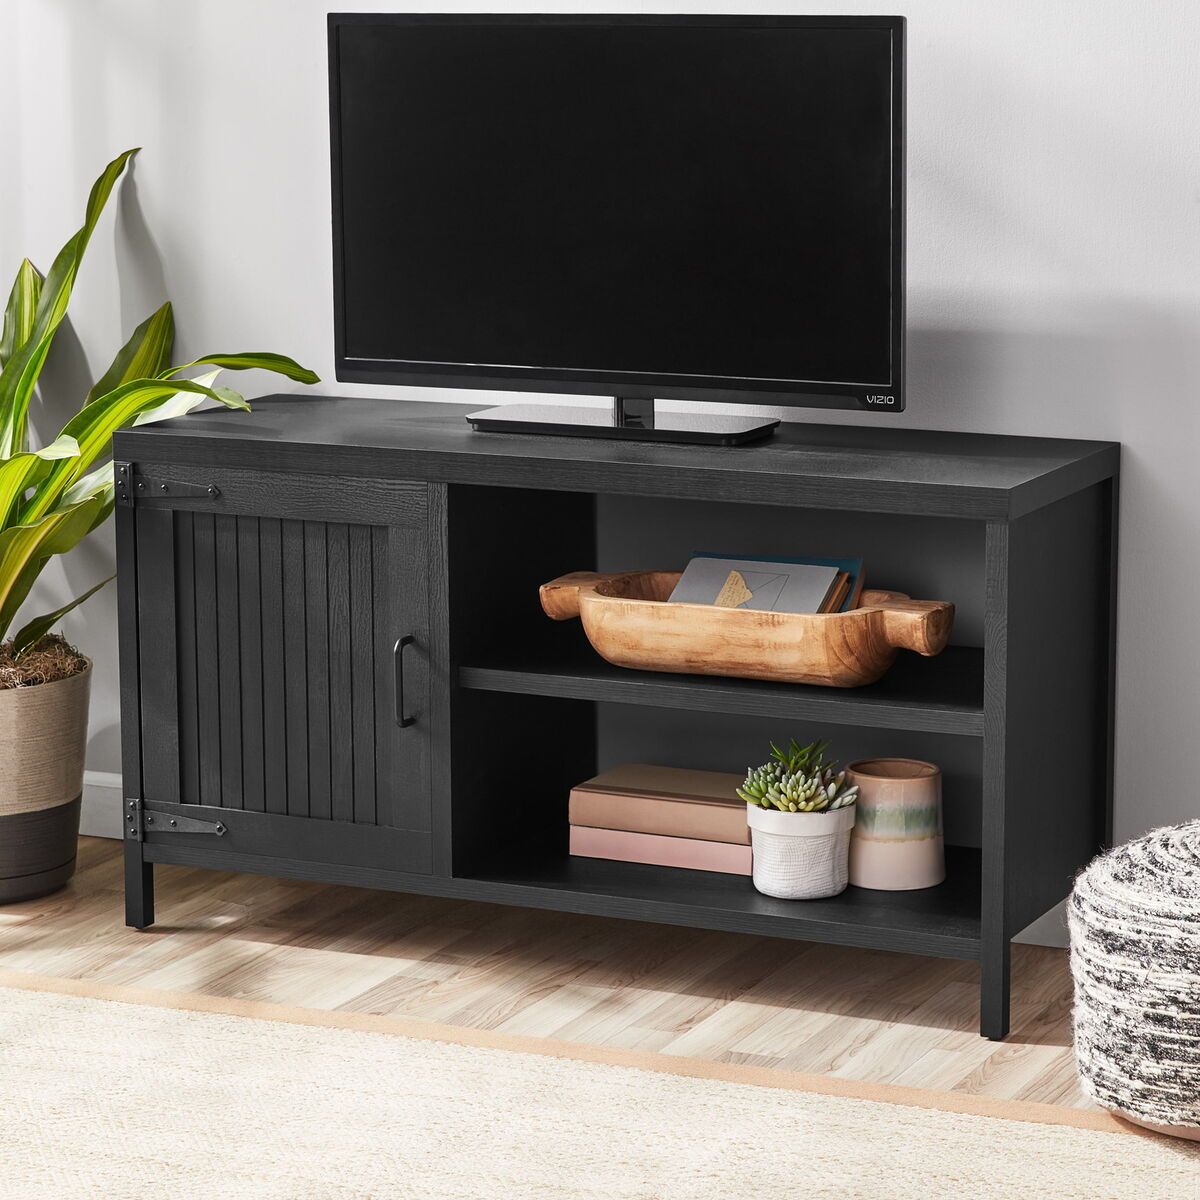 Farmhouse Tv Stand With Adjustable Shelf Open Back Storage For Tvs Up To  50" | Ebay Pertaining To Farmhouse Stands With Shelves (View 8 of 15)